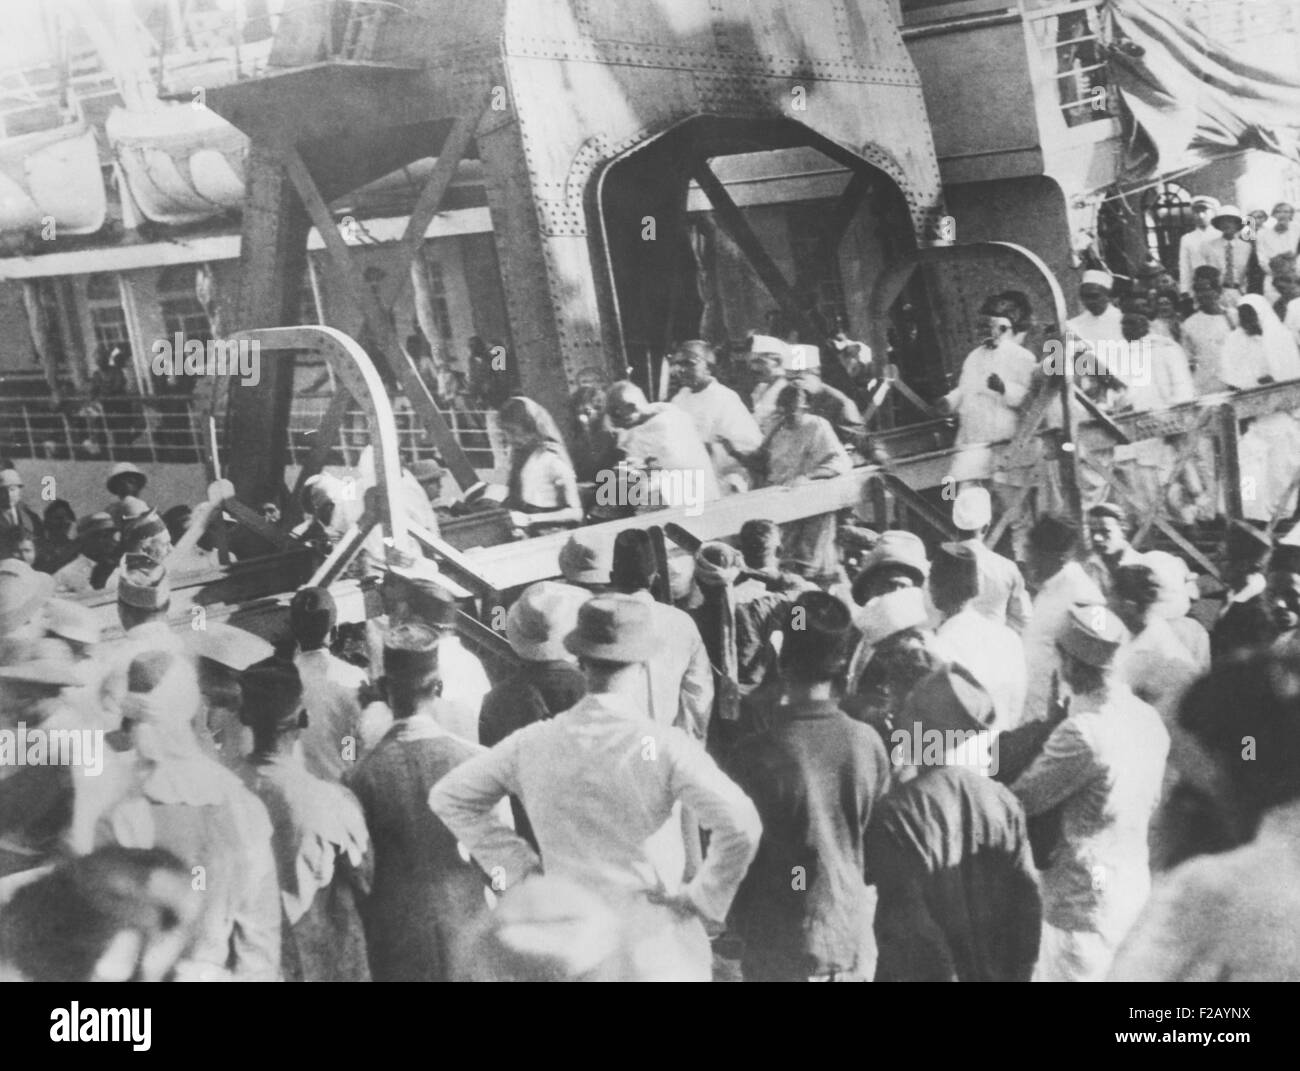 Mahatma Gandhi walking down the gangway arriving at Bombay, India, met by cheering thousands. He was returning from the 2nd London Roundtable Conference that discussed reforms in India. Dec. 1931. (CSU 2015 9 716) Stock Photo